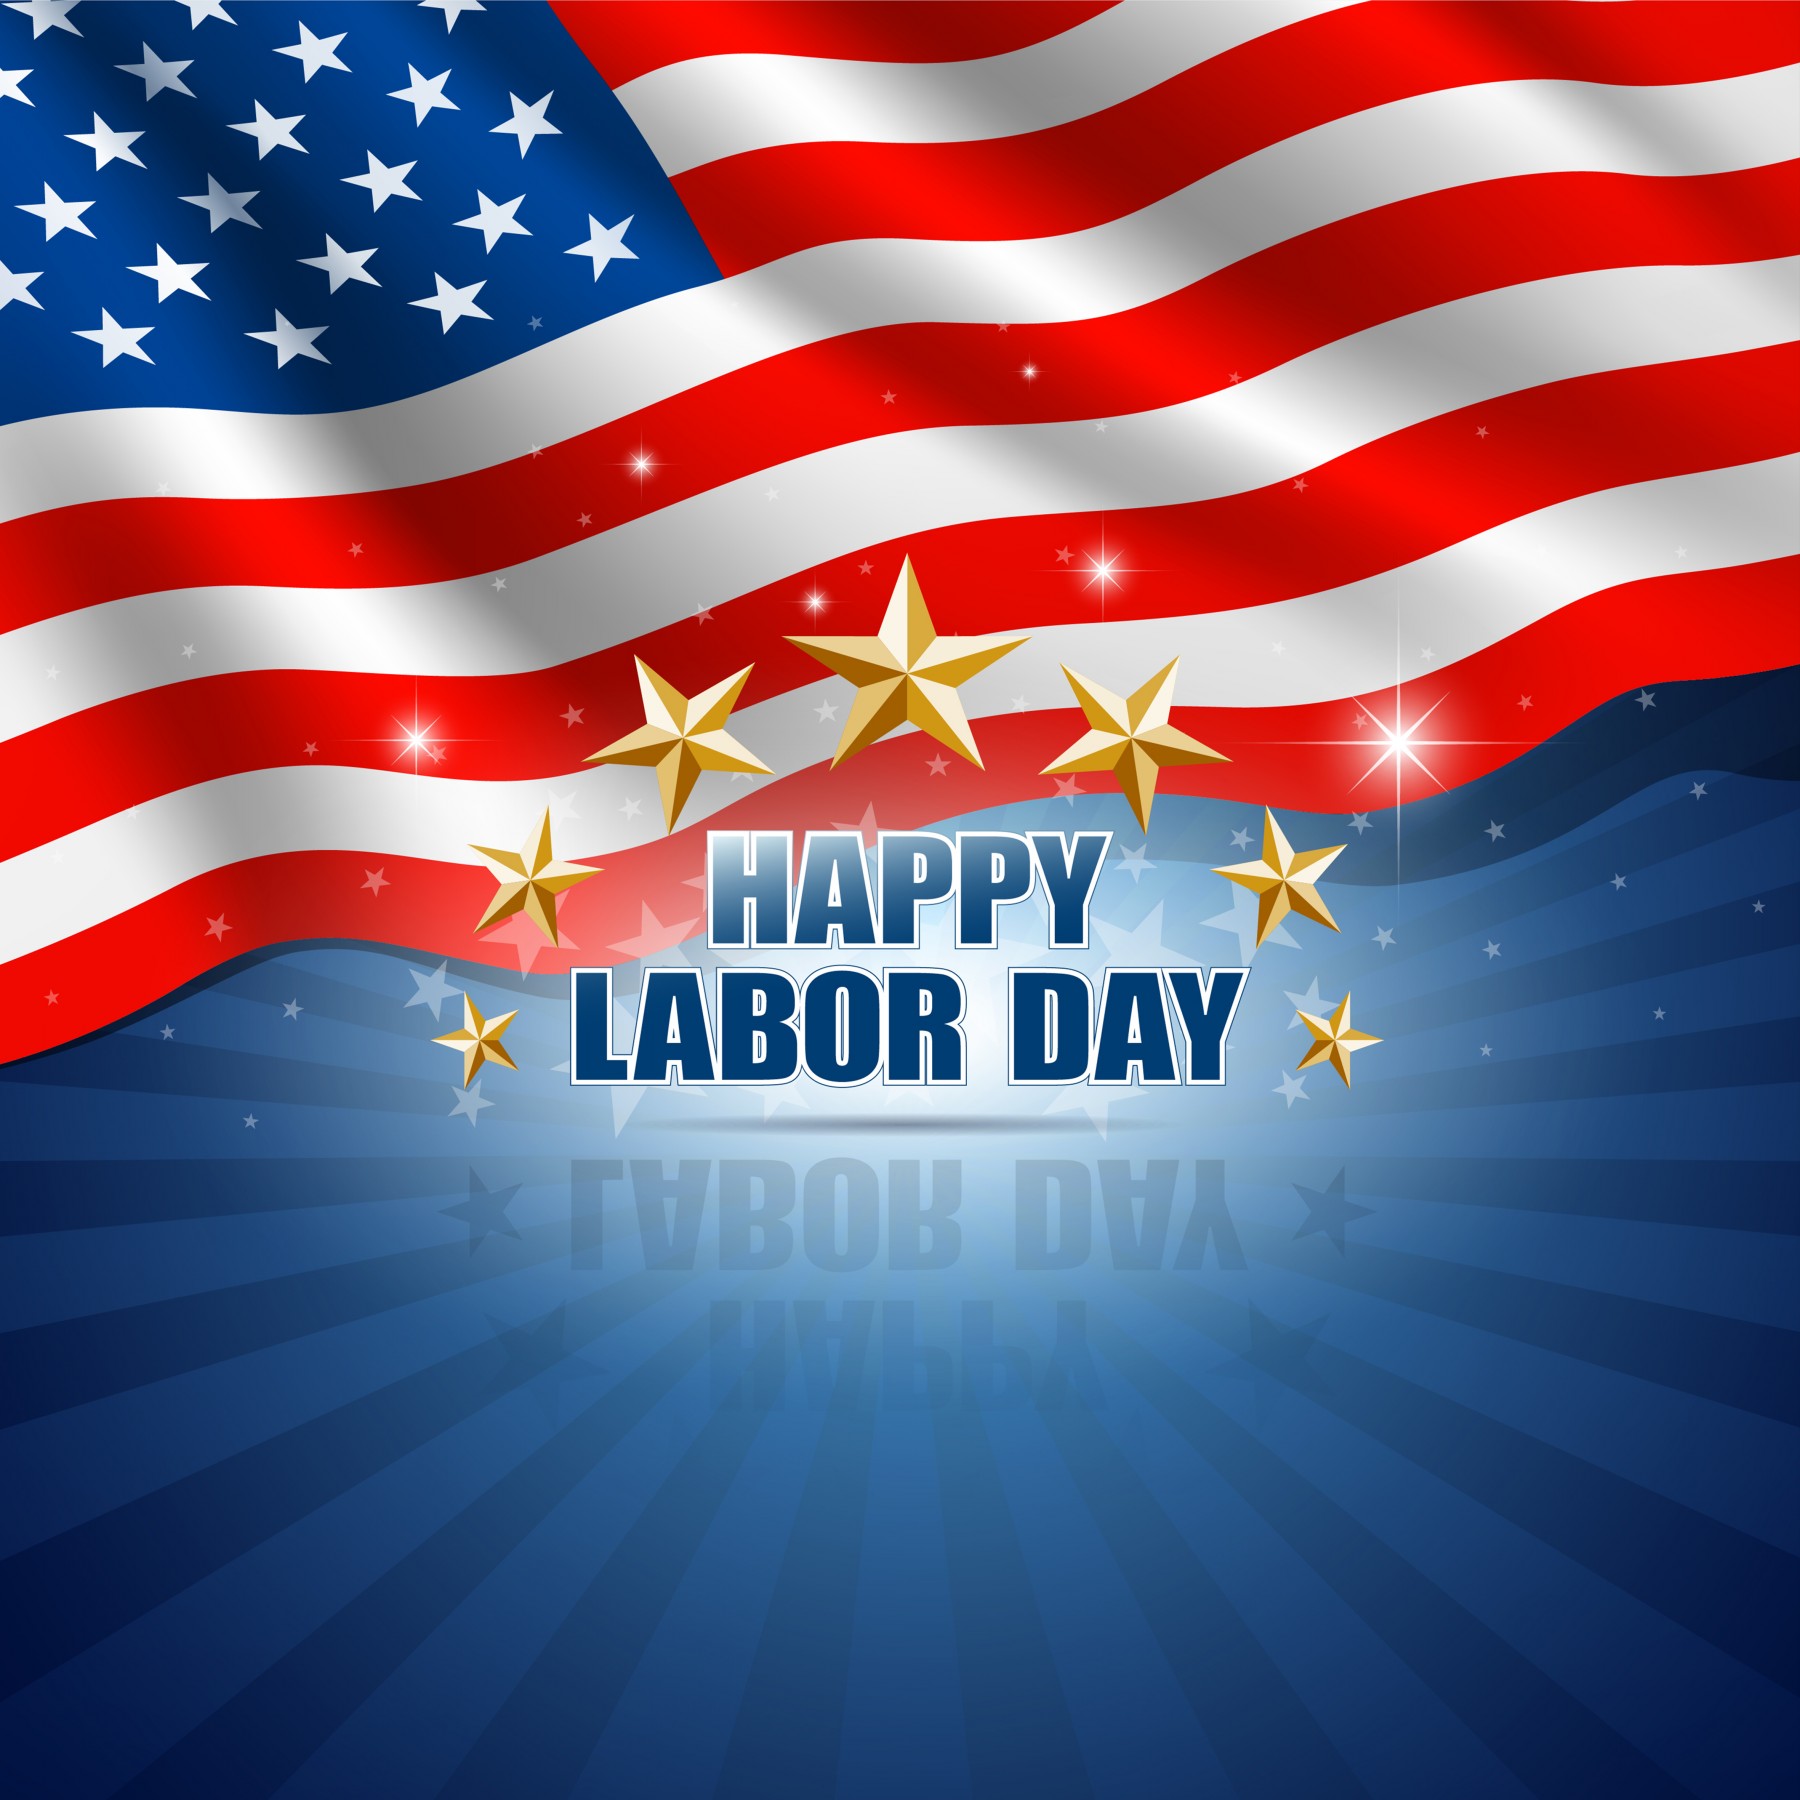 Happy Labor Day Wishes HD Wallpaper Image Photo amp Picture Free Download